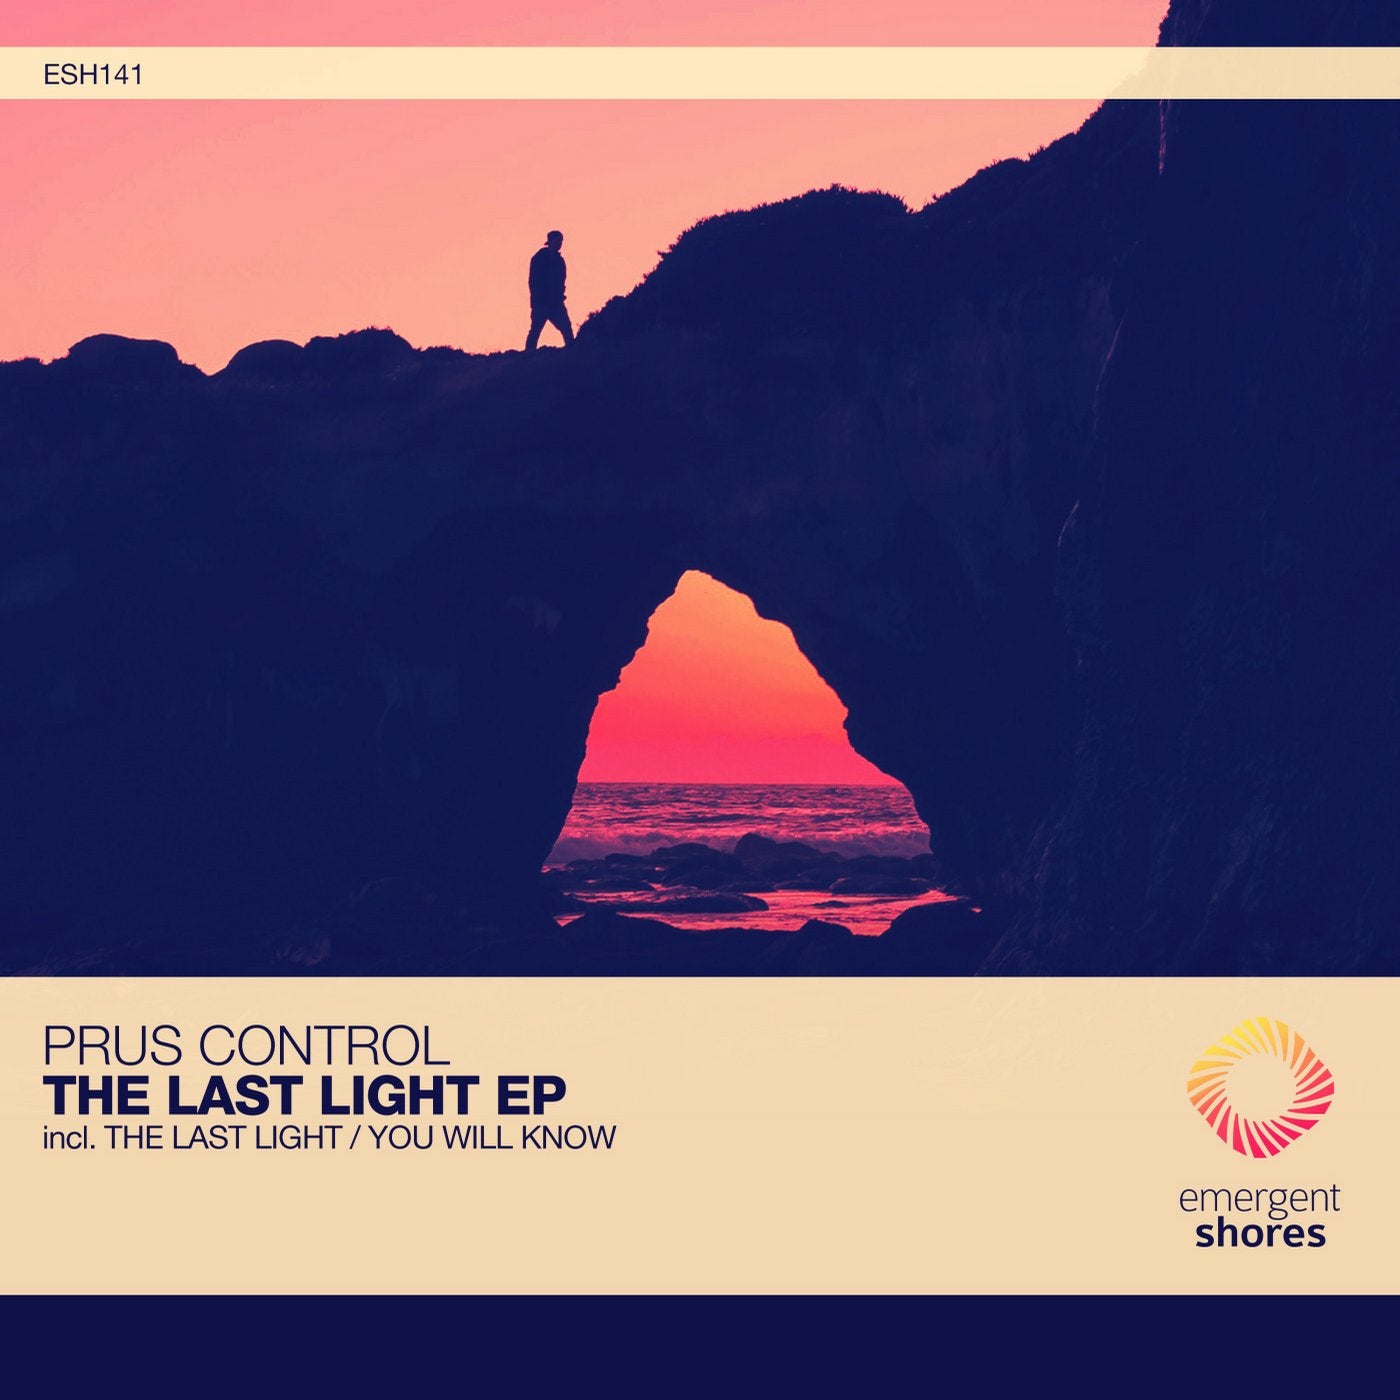 The Last Light / You Will Know